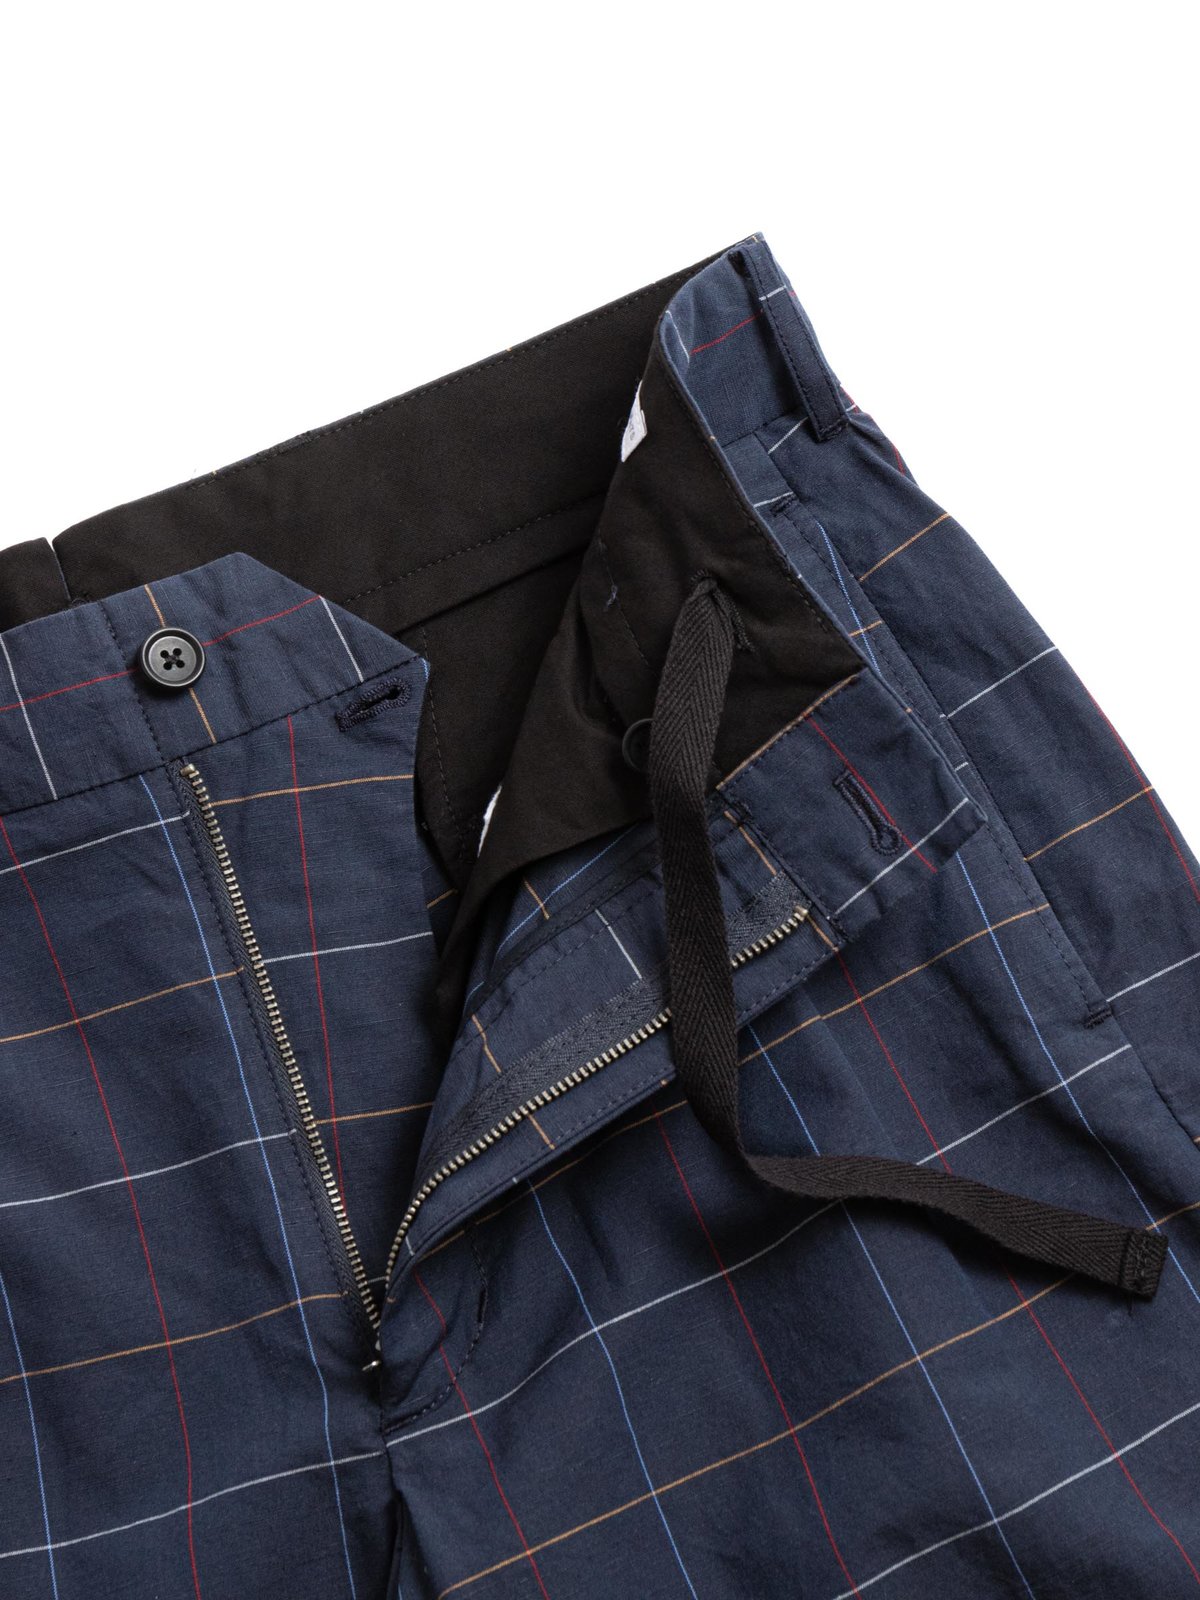 ANDOVER PANT NAVY CL WINDOWPANE - Image 3